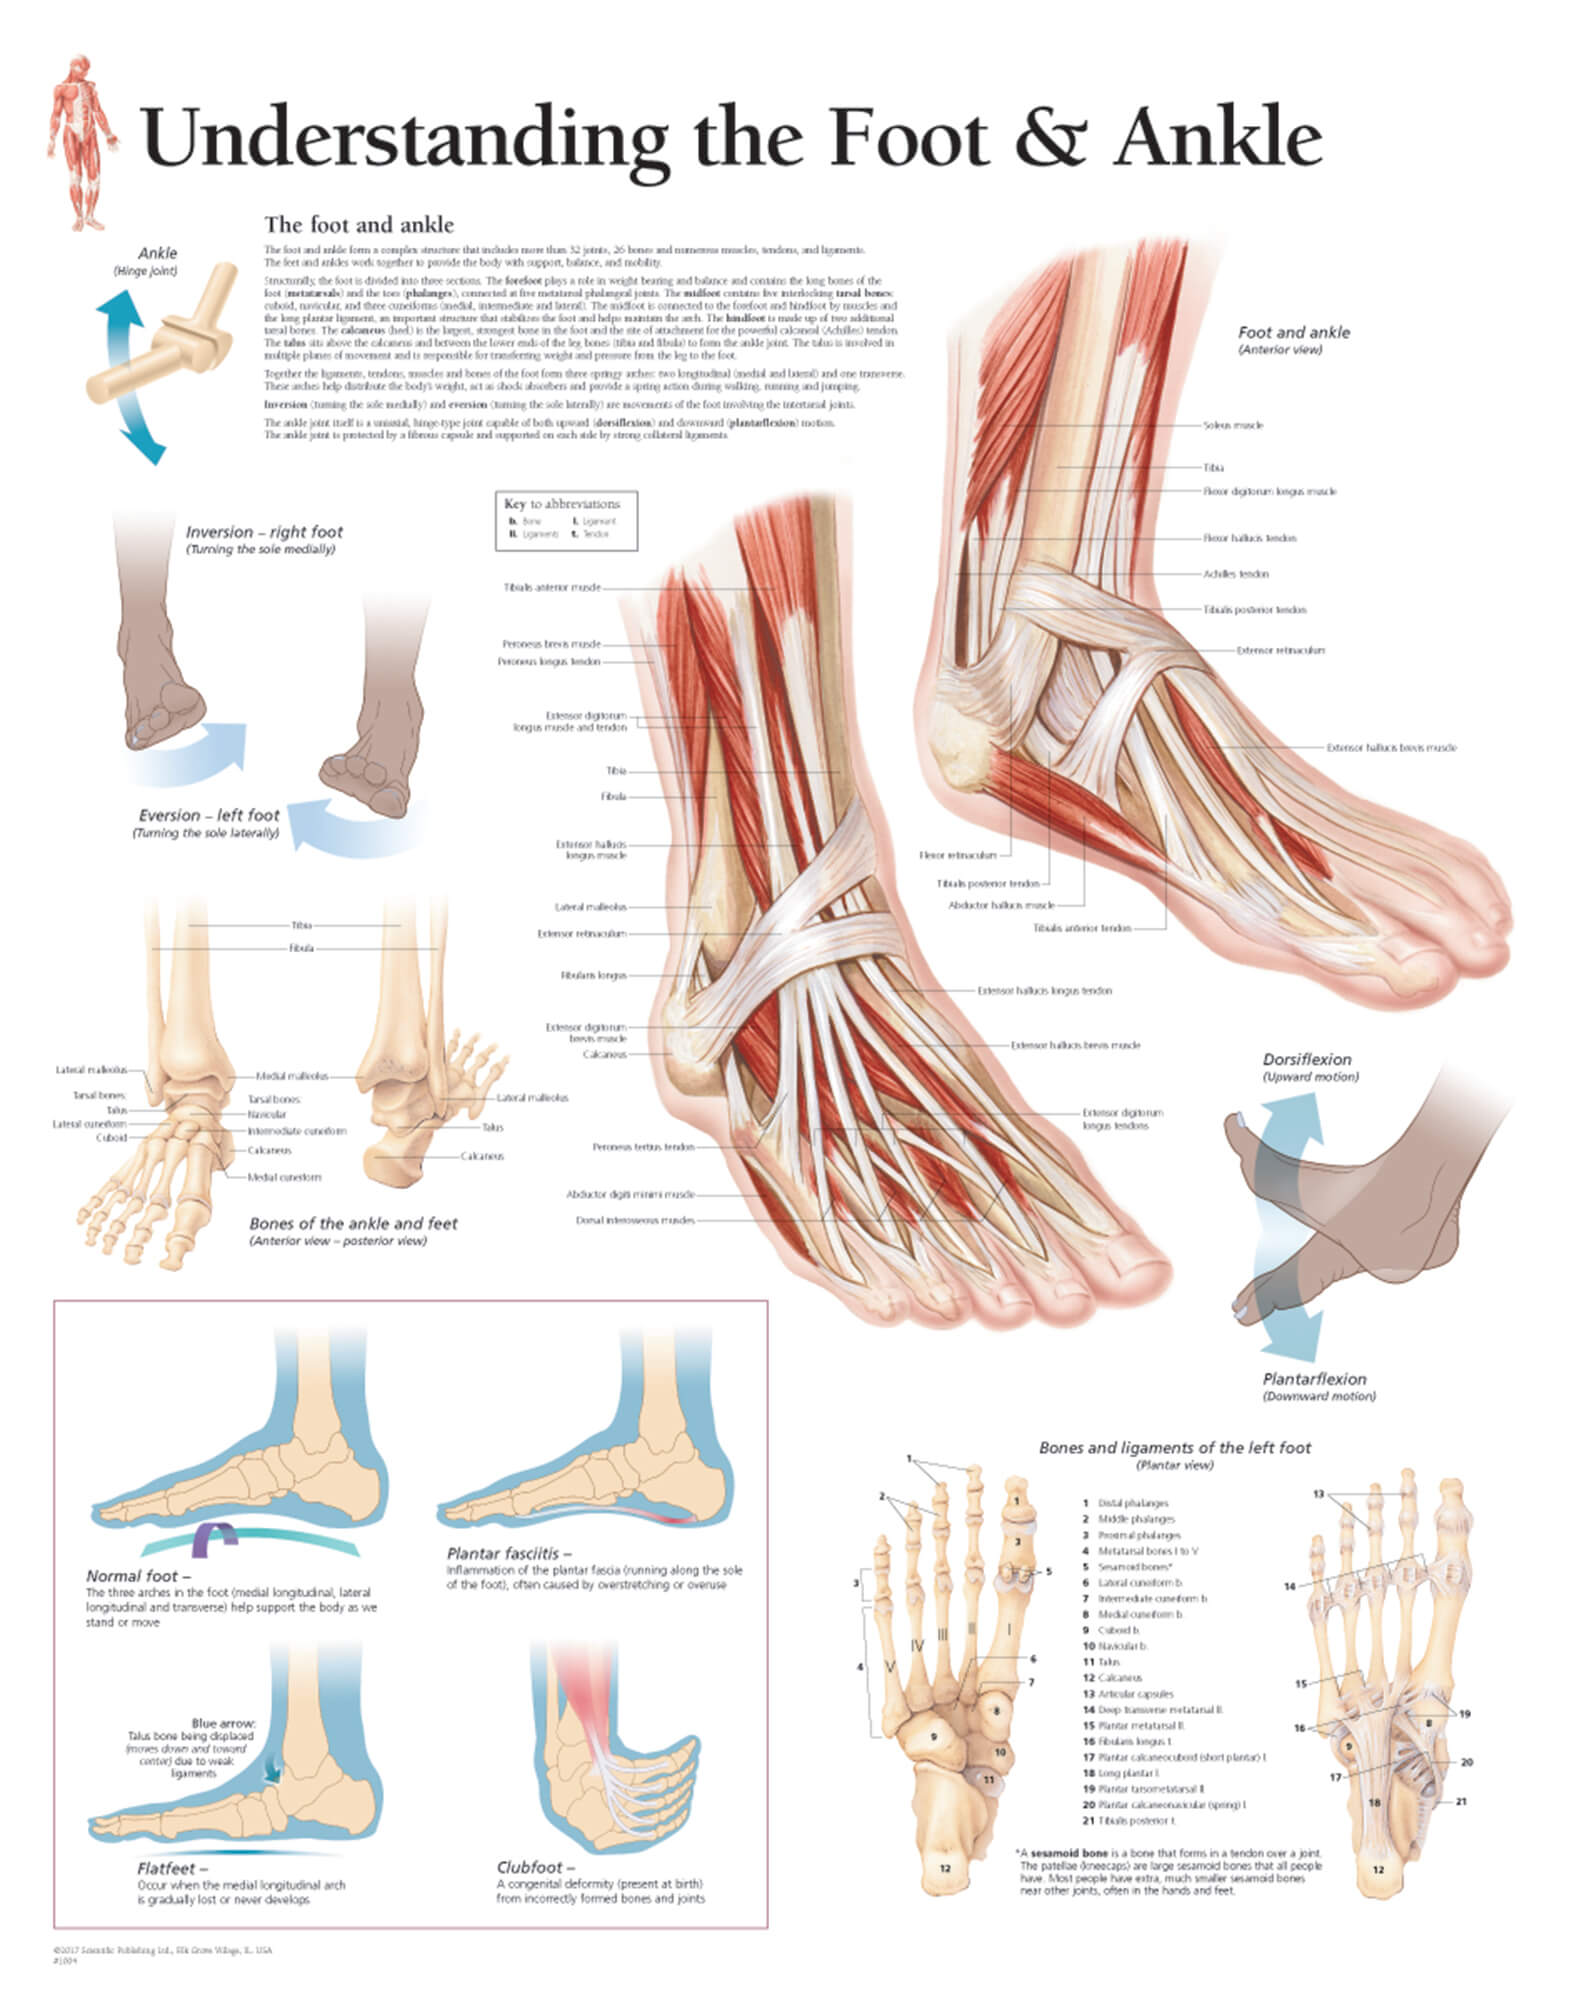 Understanding the Foot & Ankle Scientific Publishing